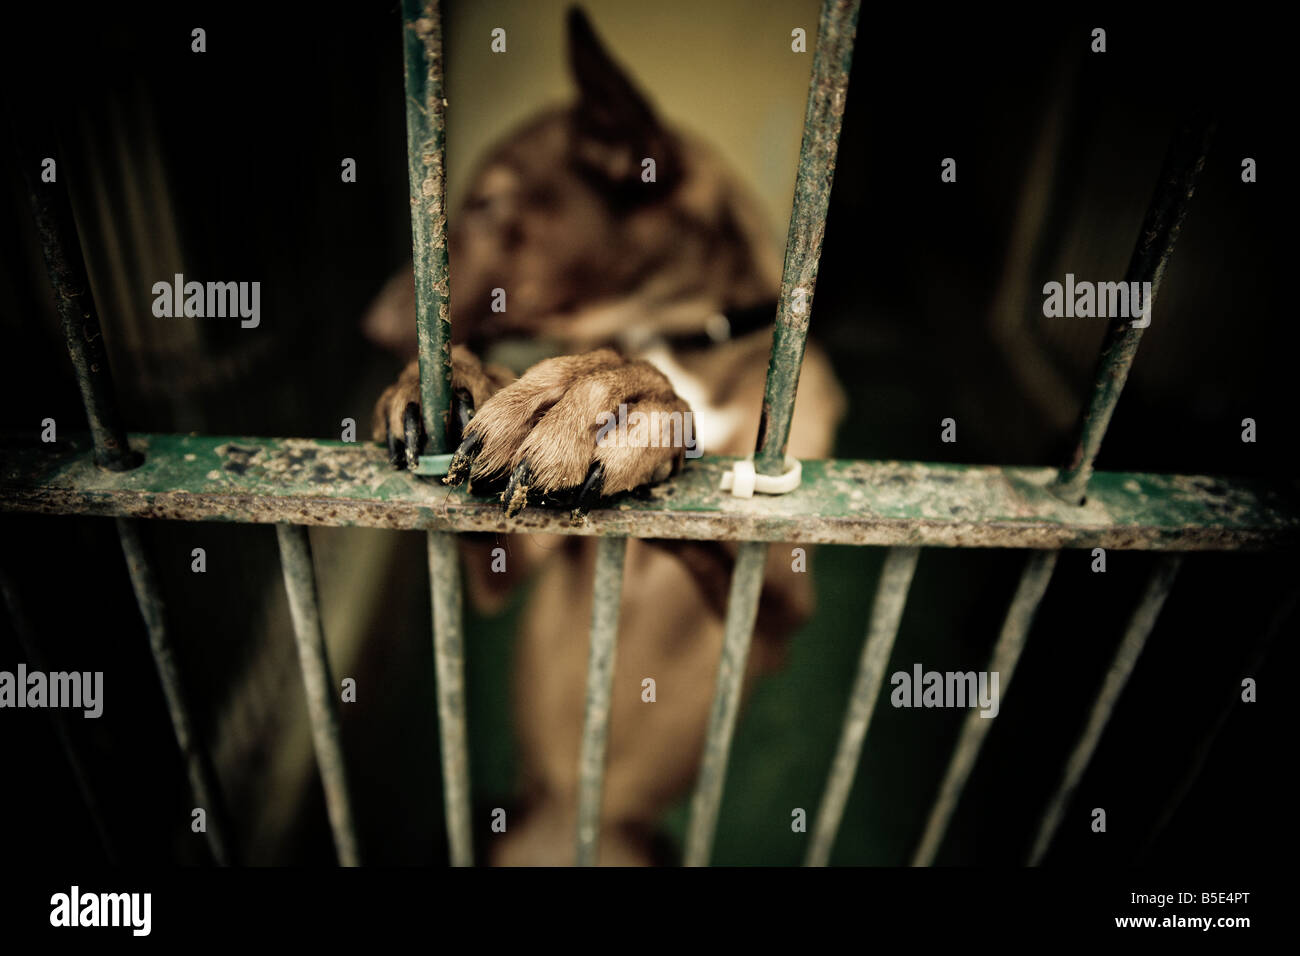 Close up of the paw of a dog behind bar. Stock Photo